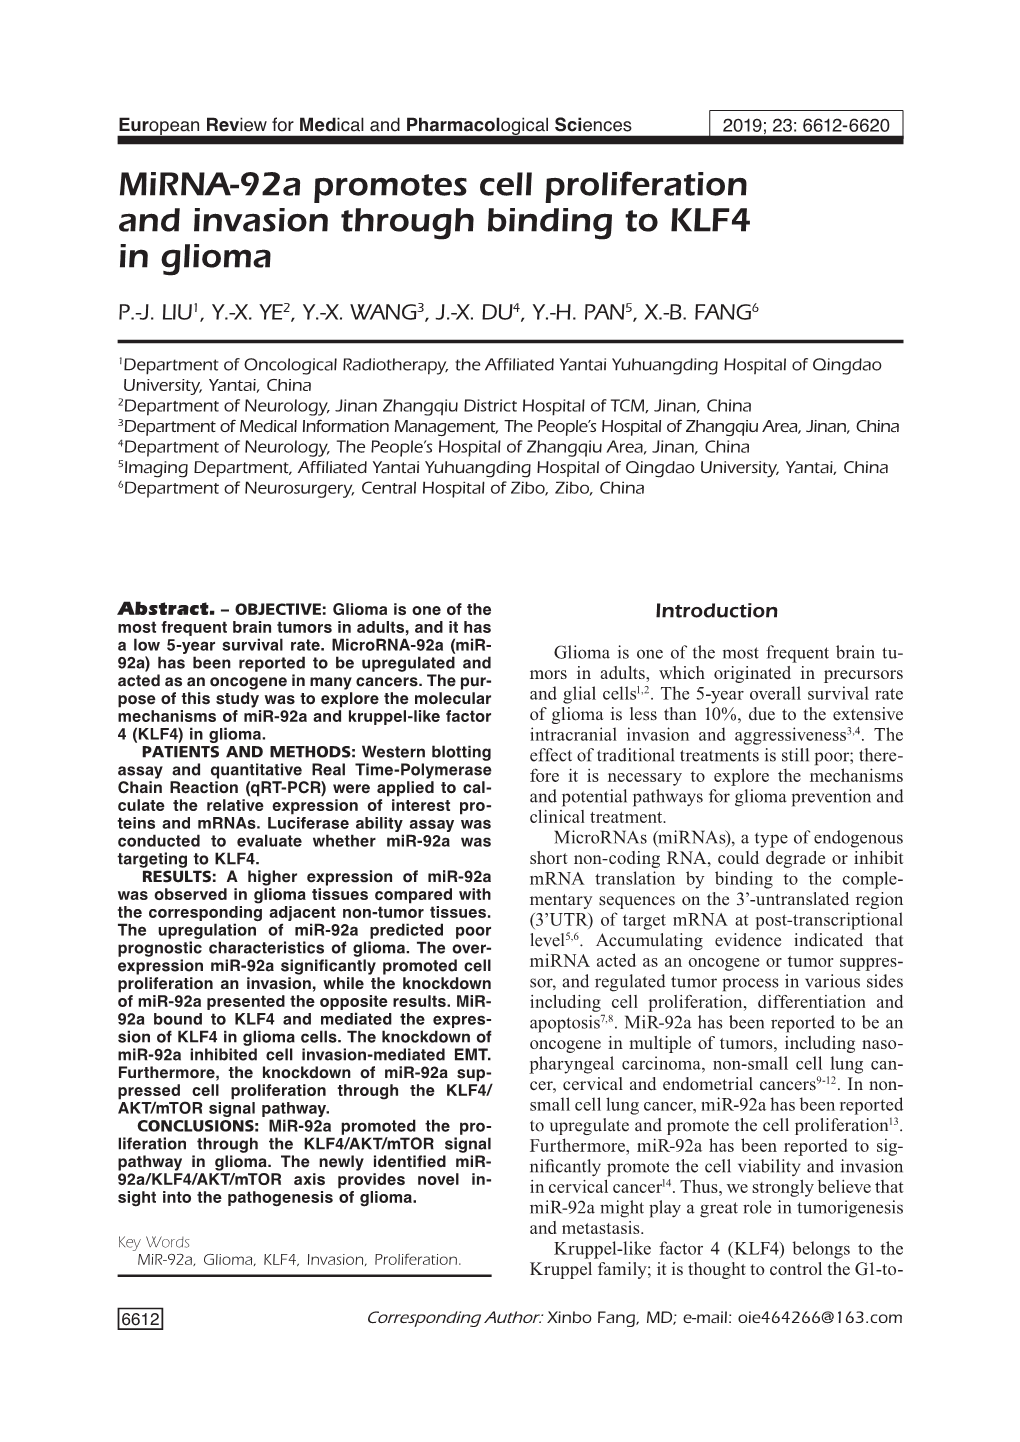 Mirna-92A Promotes Cell Proliferation and Invasion Through Binding to KLF4 in Glioma